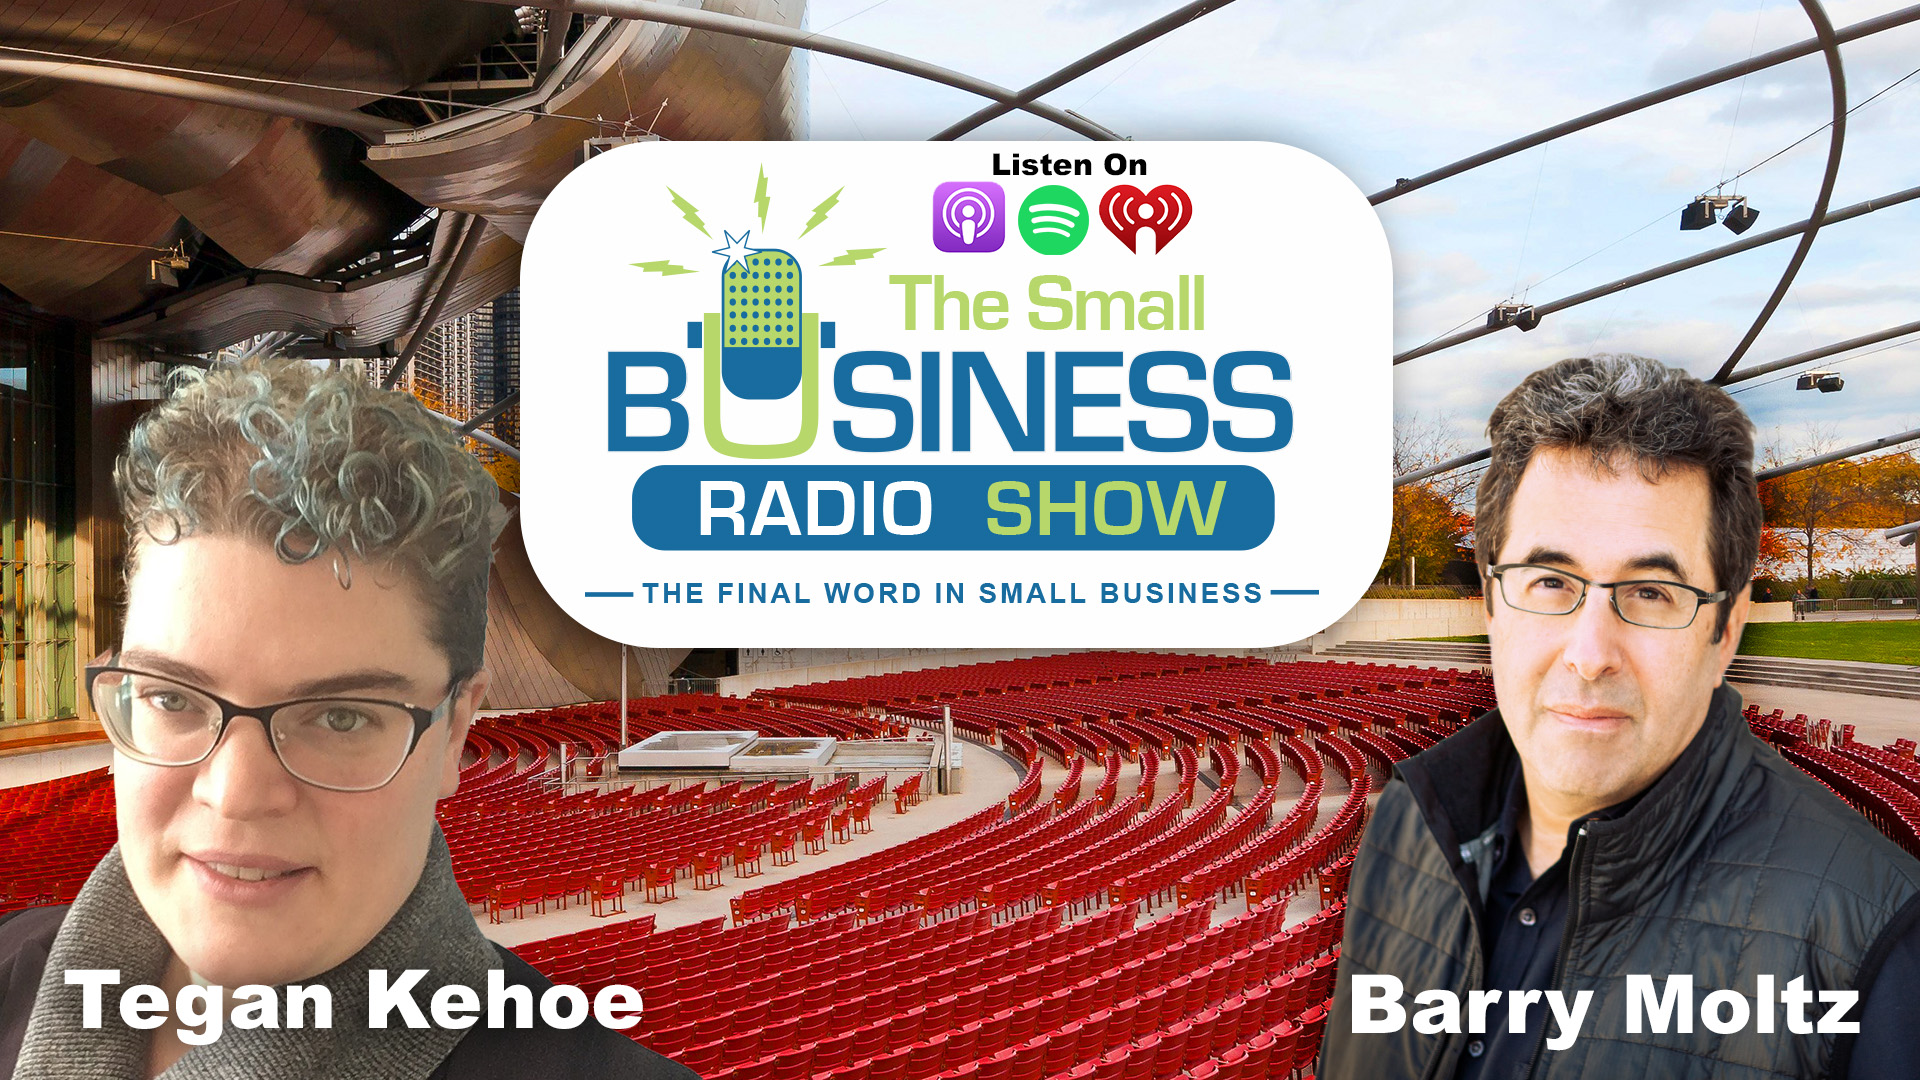 Tegan Kehoe on The Small Business Radio Show